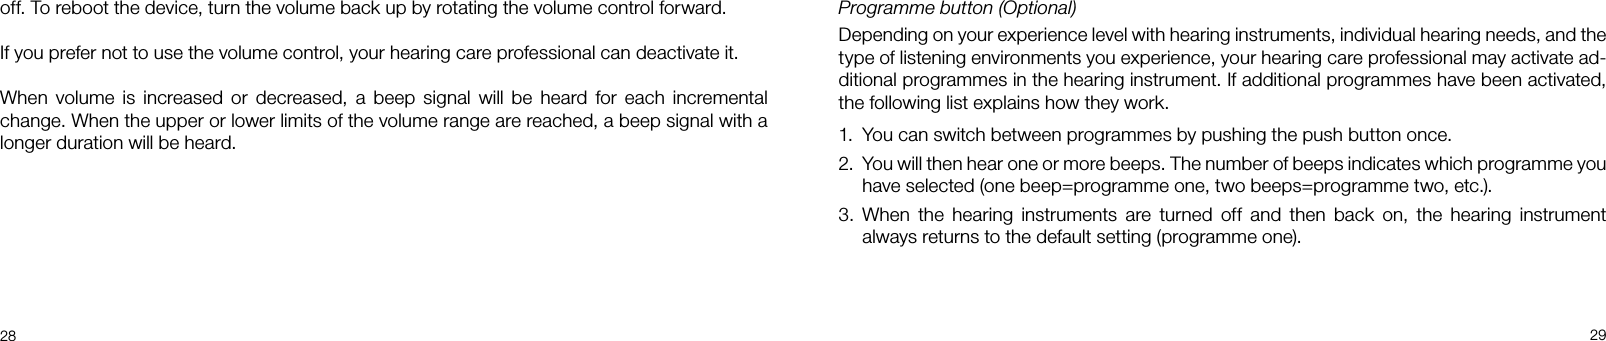 28 29Programme button (Optional)Depending on your experience level with hearing instruments, individual hearing needs, and the type of listening environments you experience, your hearing care professional may activate ad-ditional programmes in the hearing instrument. If additional programmes have been activated, the following list explains how they work.1.  You can switch between programmes by pushing the push button once.2.  You will then hear one or more beeps. The number of beeps indicates which programme you have selected (one beep=programme one, two beeps=programme two, etc.). 3.  When the hearing instruments are turned off and then back on, the hearing instrument always returns to the default setting (programme one).off. To reboot the device, turn the volume back up by rotating the volume control forward.If you prefer not to use the volume control, your hearing care professional can deactivate it.When volume is increased or decreased, a beep signal will be heard for each incremental change. When the upper or lower limits of the volume range are reached, a beep signal with a longer duration will be heard.